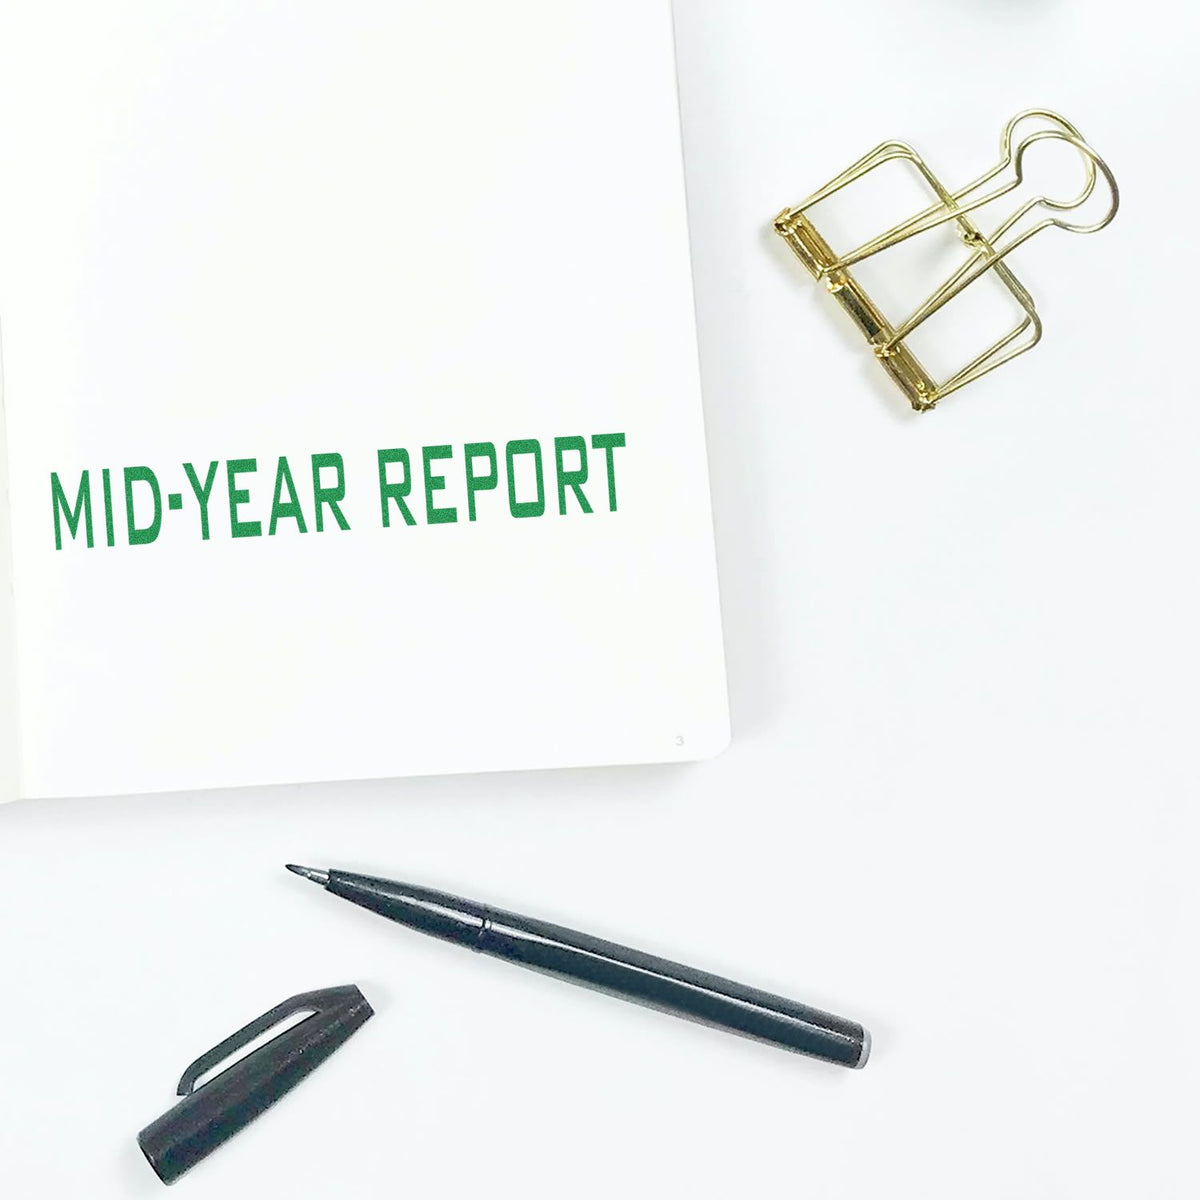 Mid-Year Report Rubber Stamp In Use